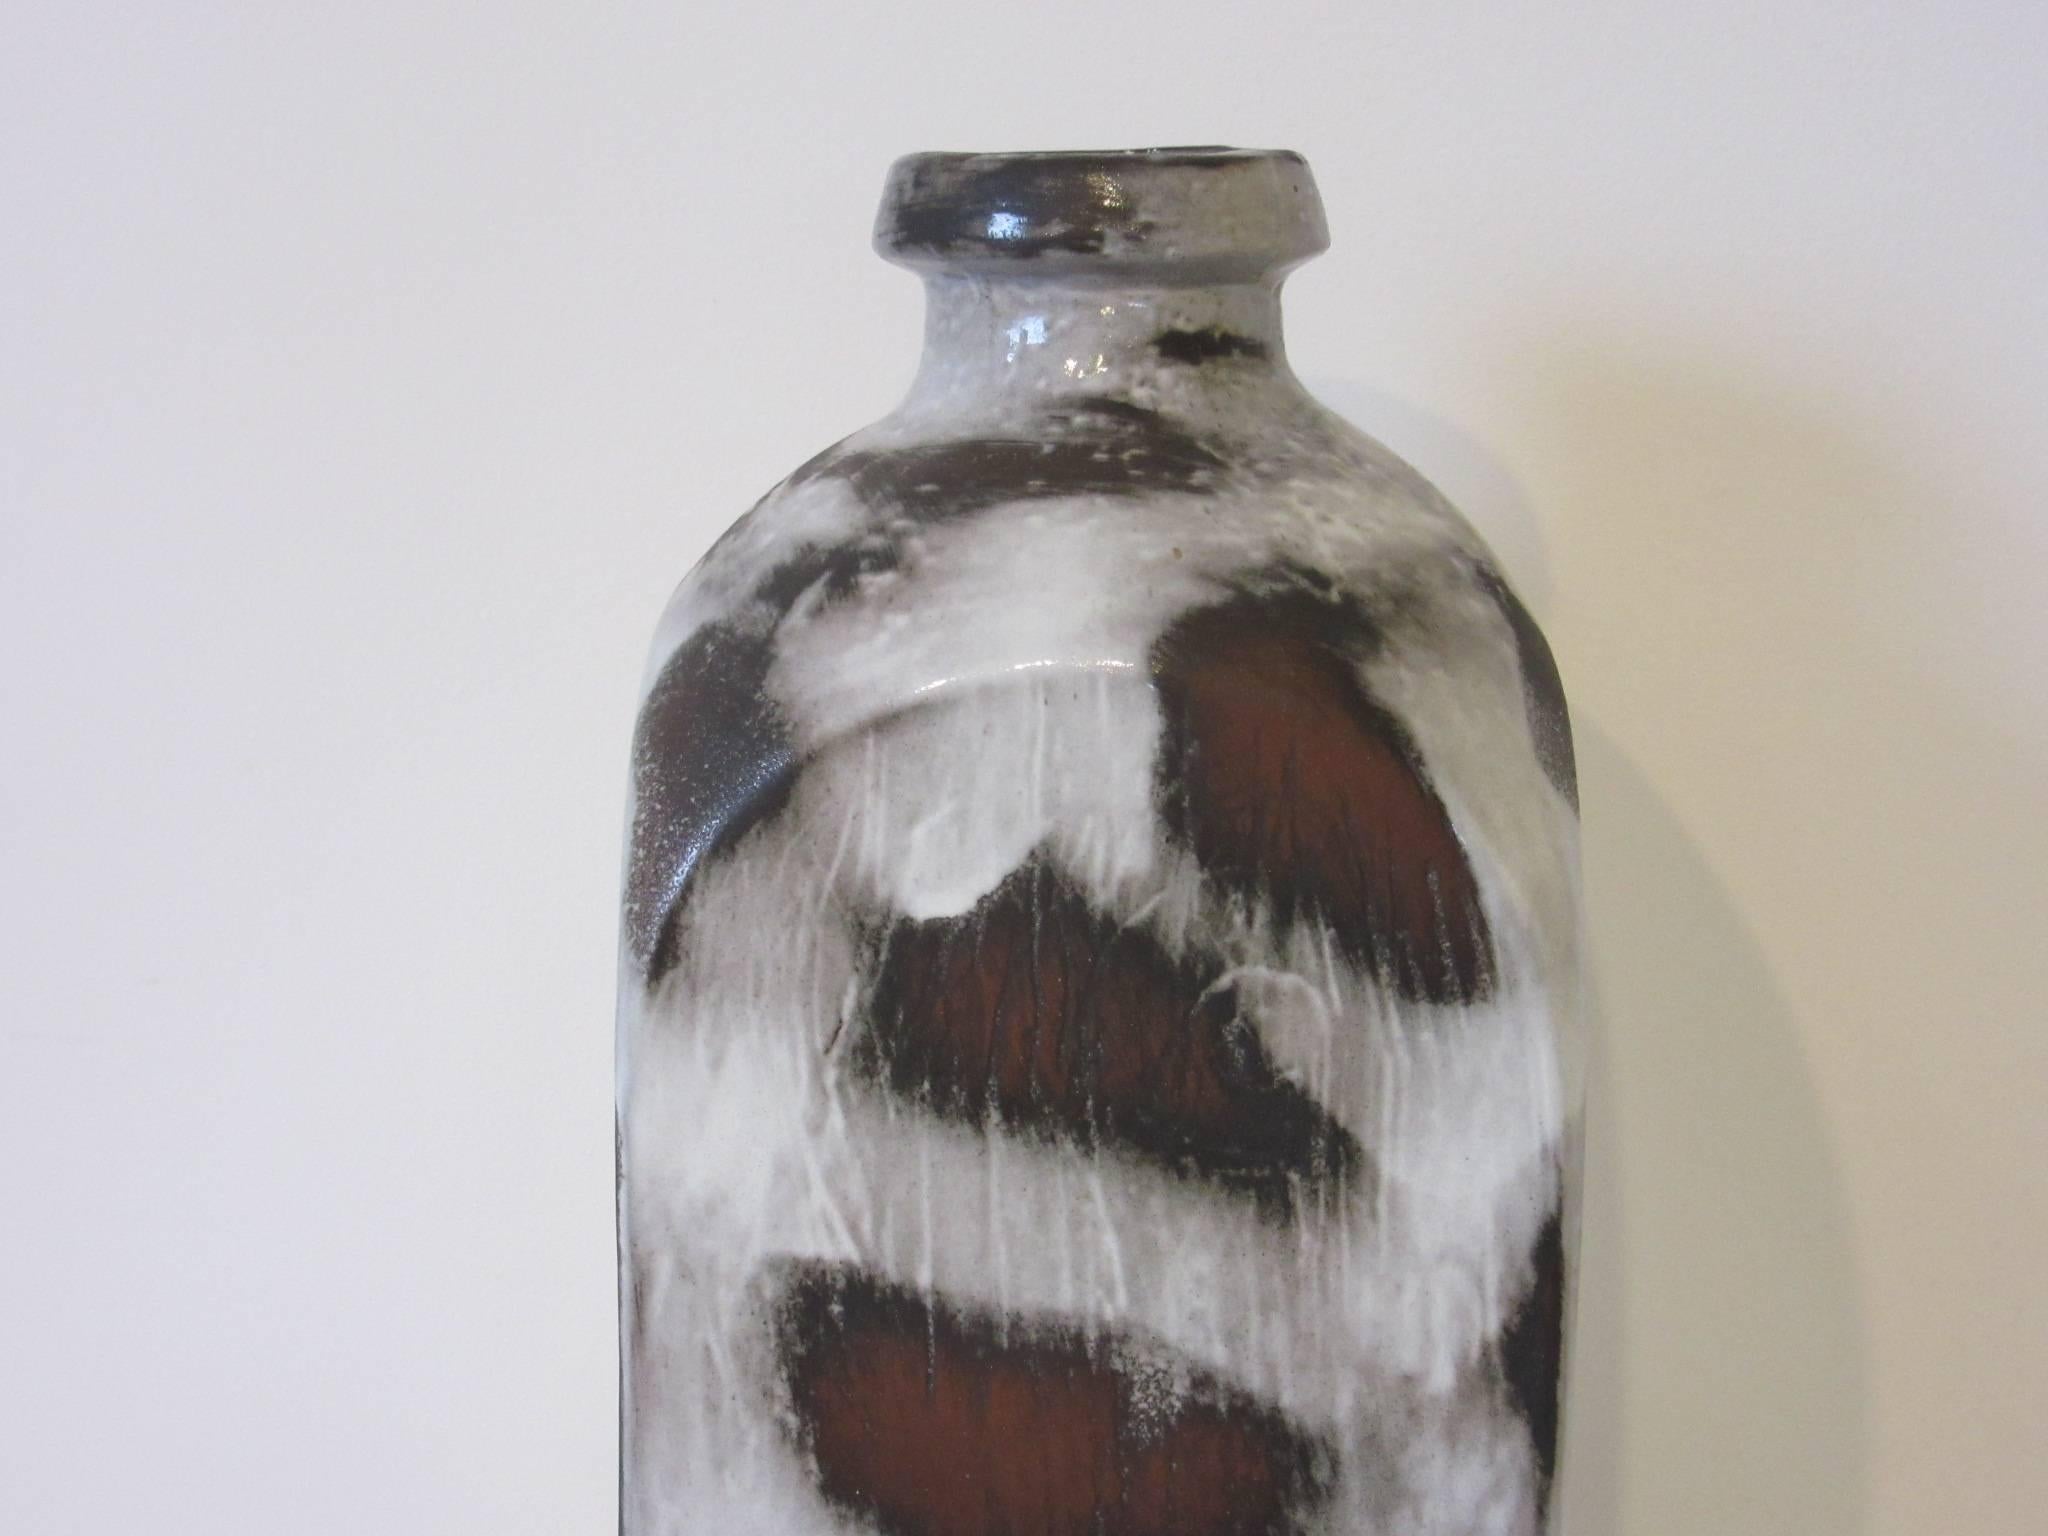 A very large sized pottery vase with free-form glazing in cream, dark browns and black signed to the base and numbered Mendoza with a small tag made in Germany by The Hanns Welling Ceramano Company.